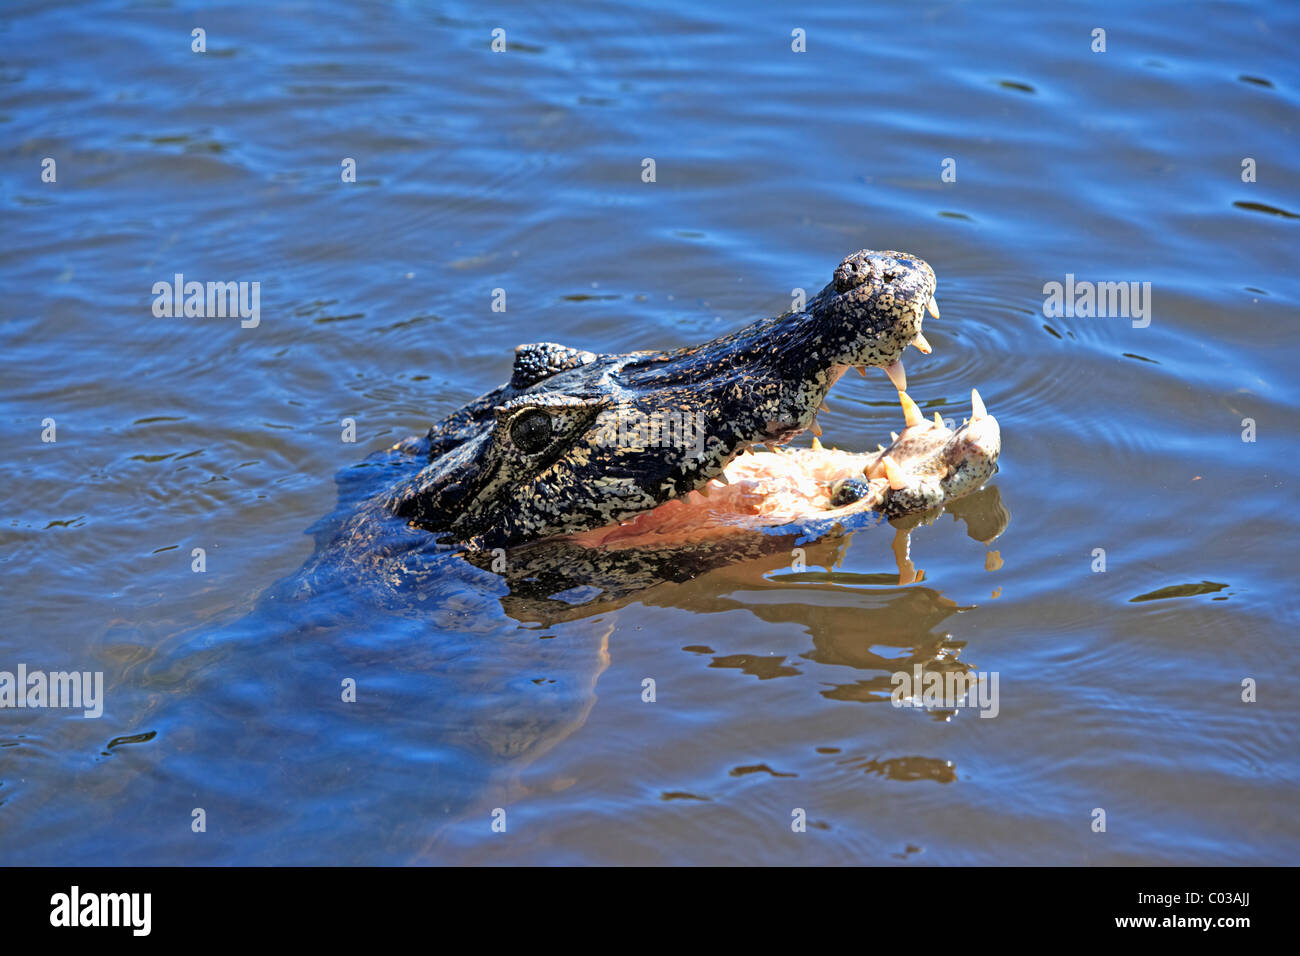 Yacare Caiman (Caiman yacare), adult floating in the water with its mouth open, Pantanal, Brazil, South America Stock Photo